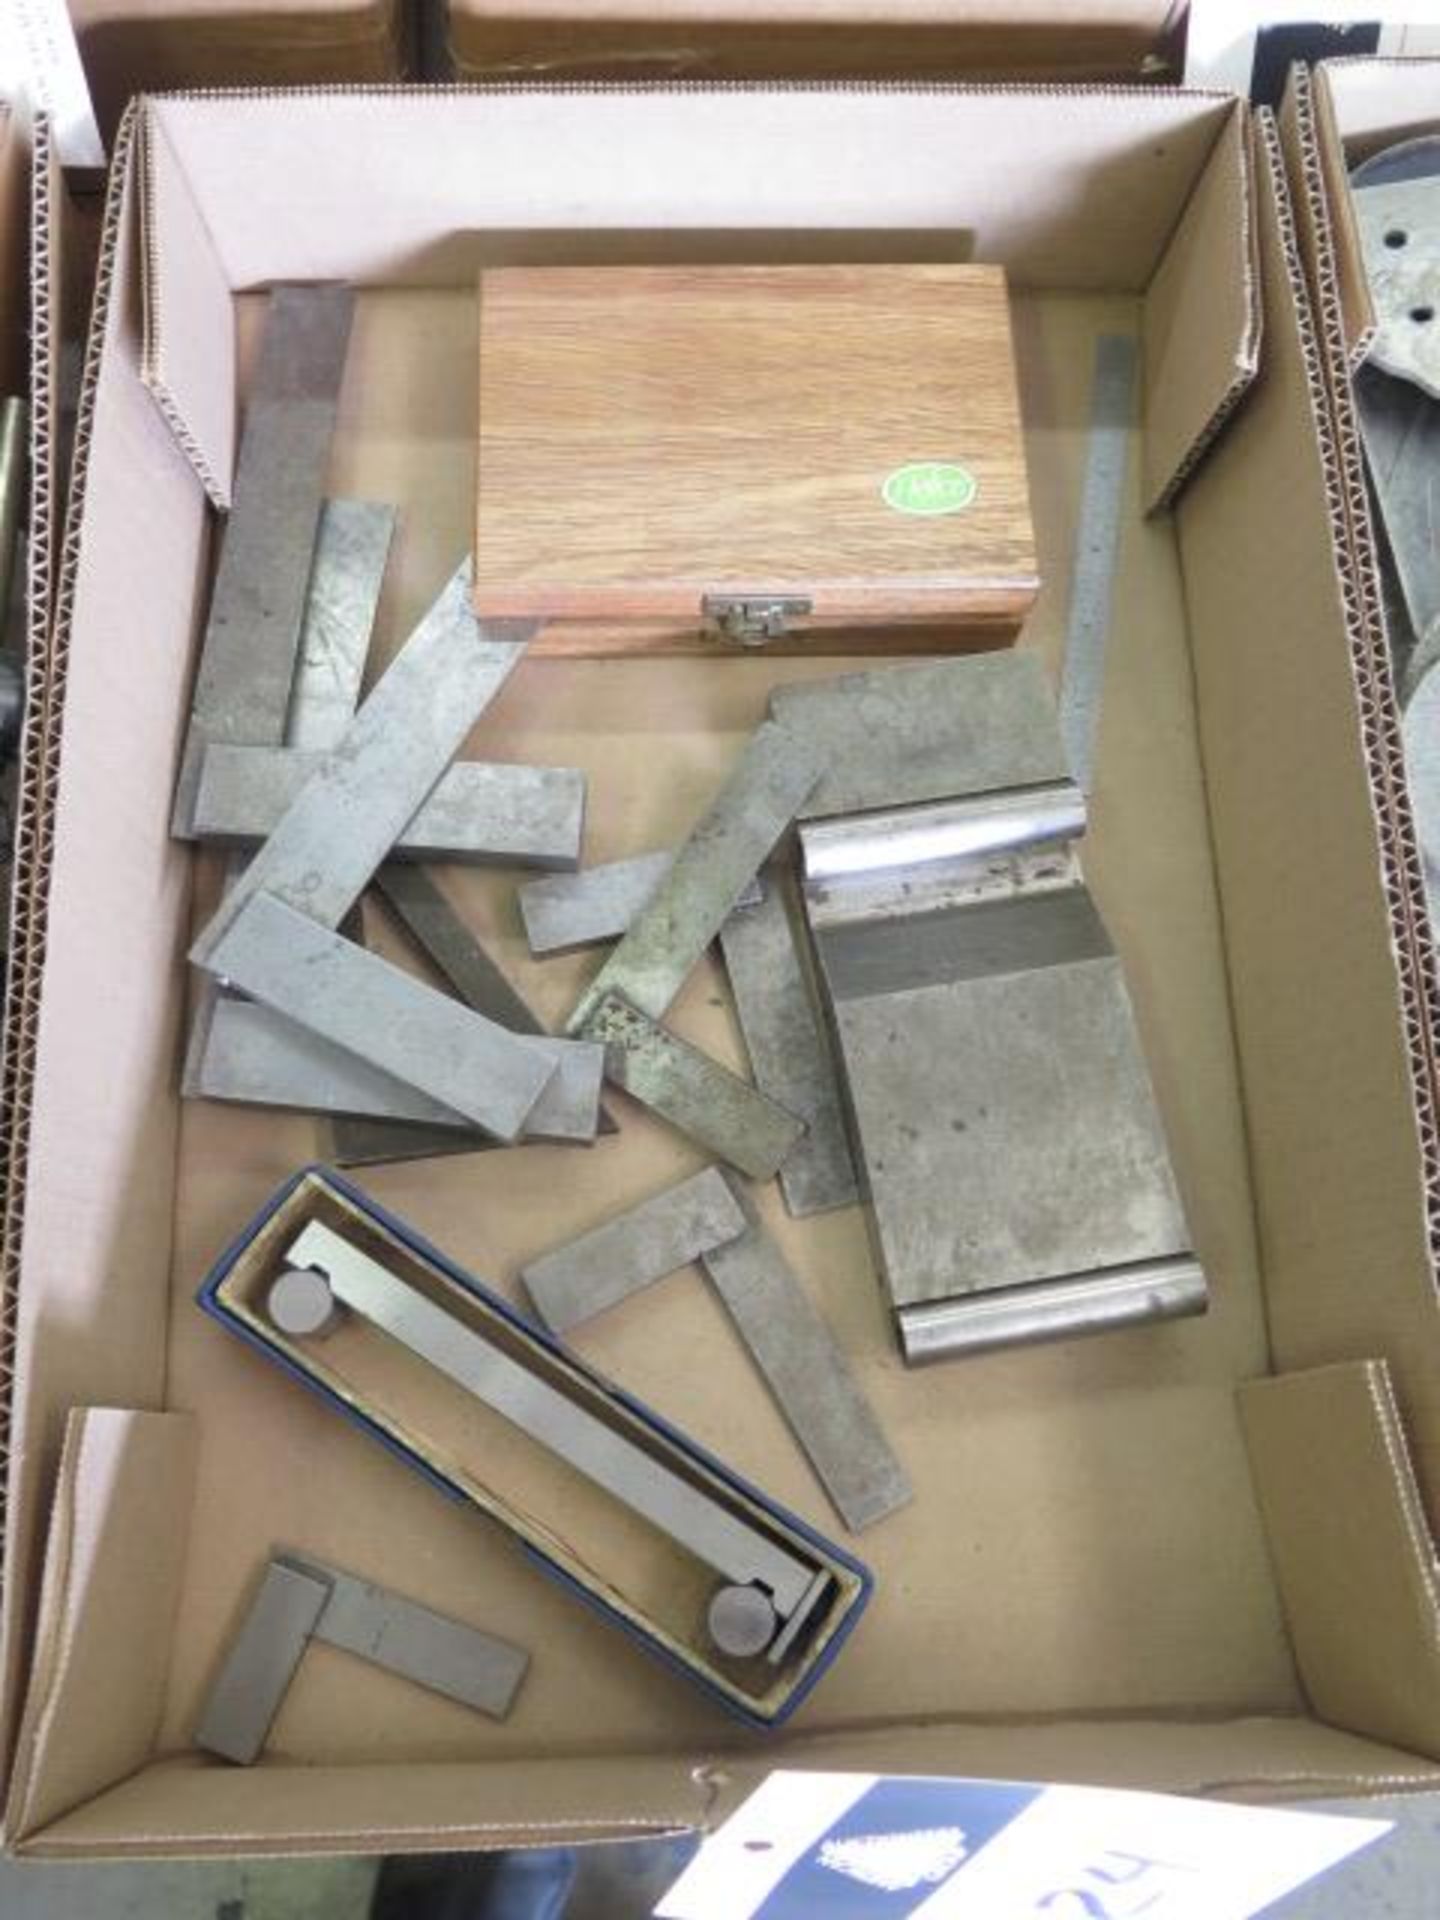 Planer Gage, Sine Bars and Squares (SOLD AS-IS - NO WARRANTY) - Image 2 of 6